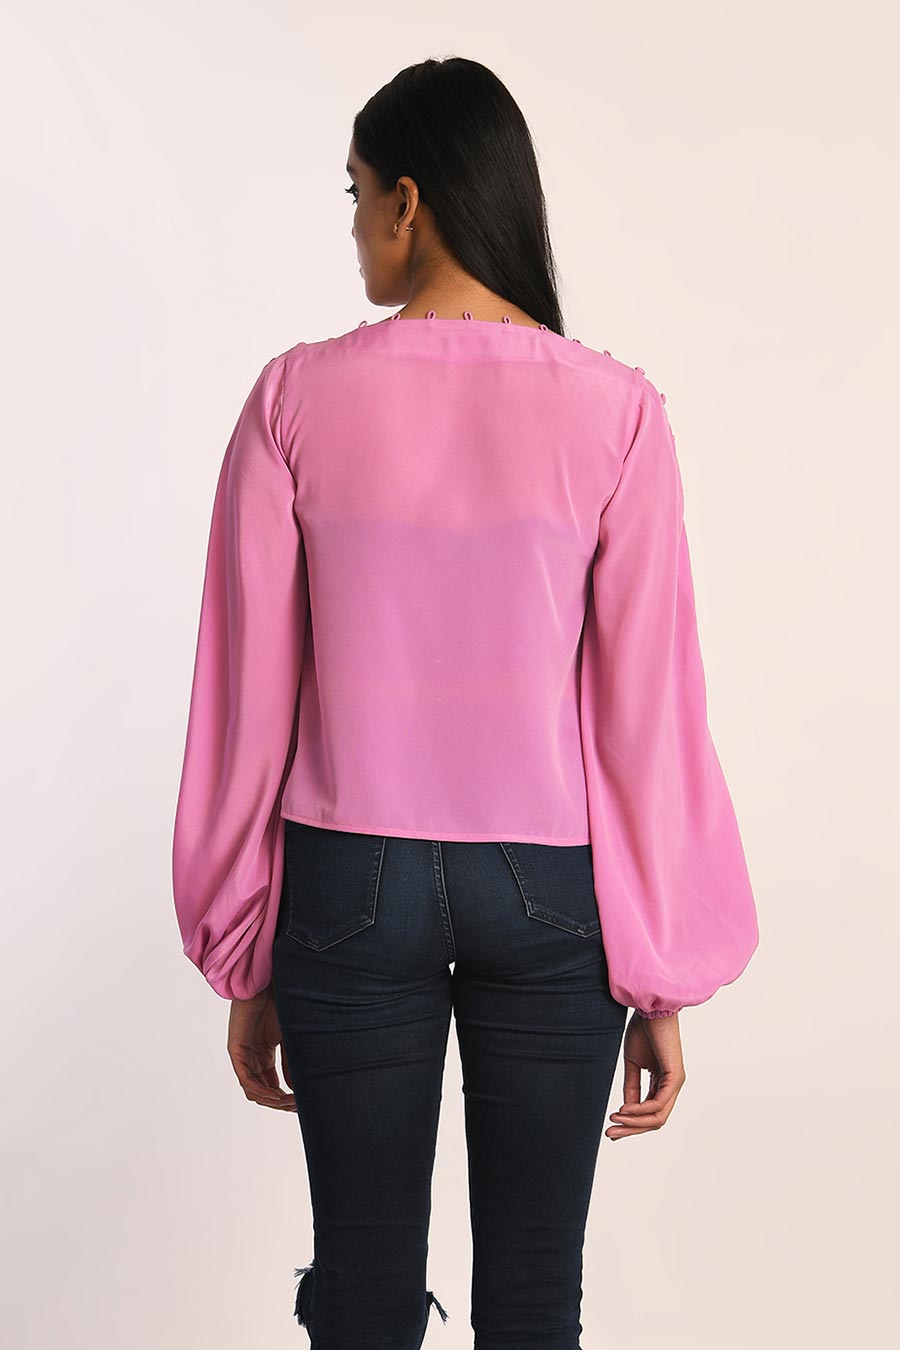 Taffy Button Down Pink Top